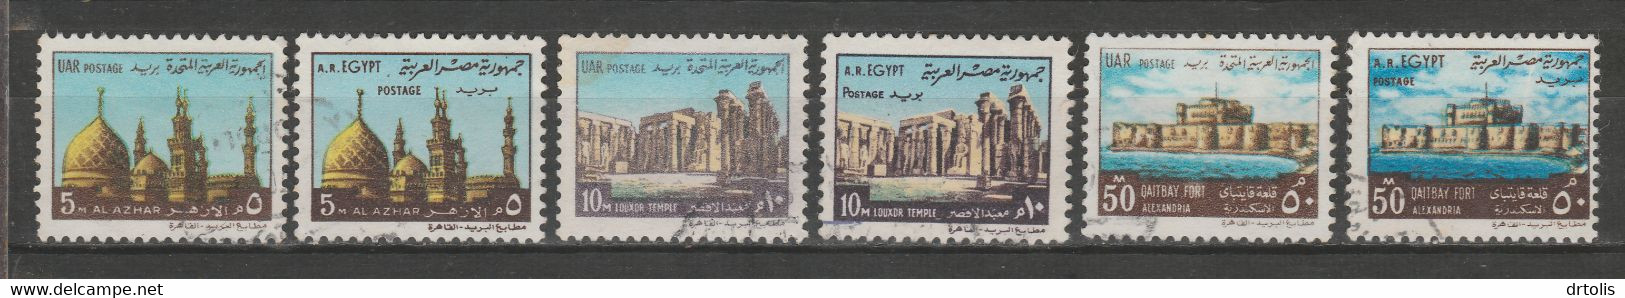 EGYPT / 1970 & 1972 ISSUES / VF USED - Used Stamps